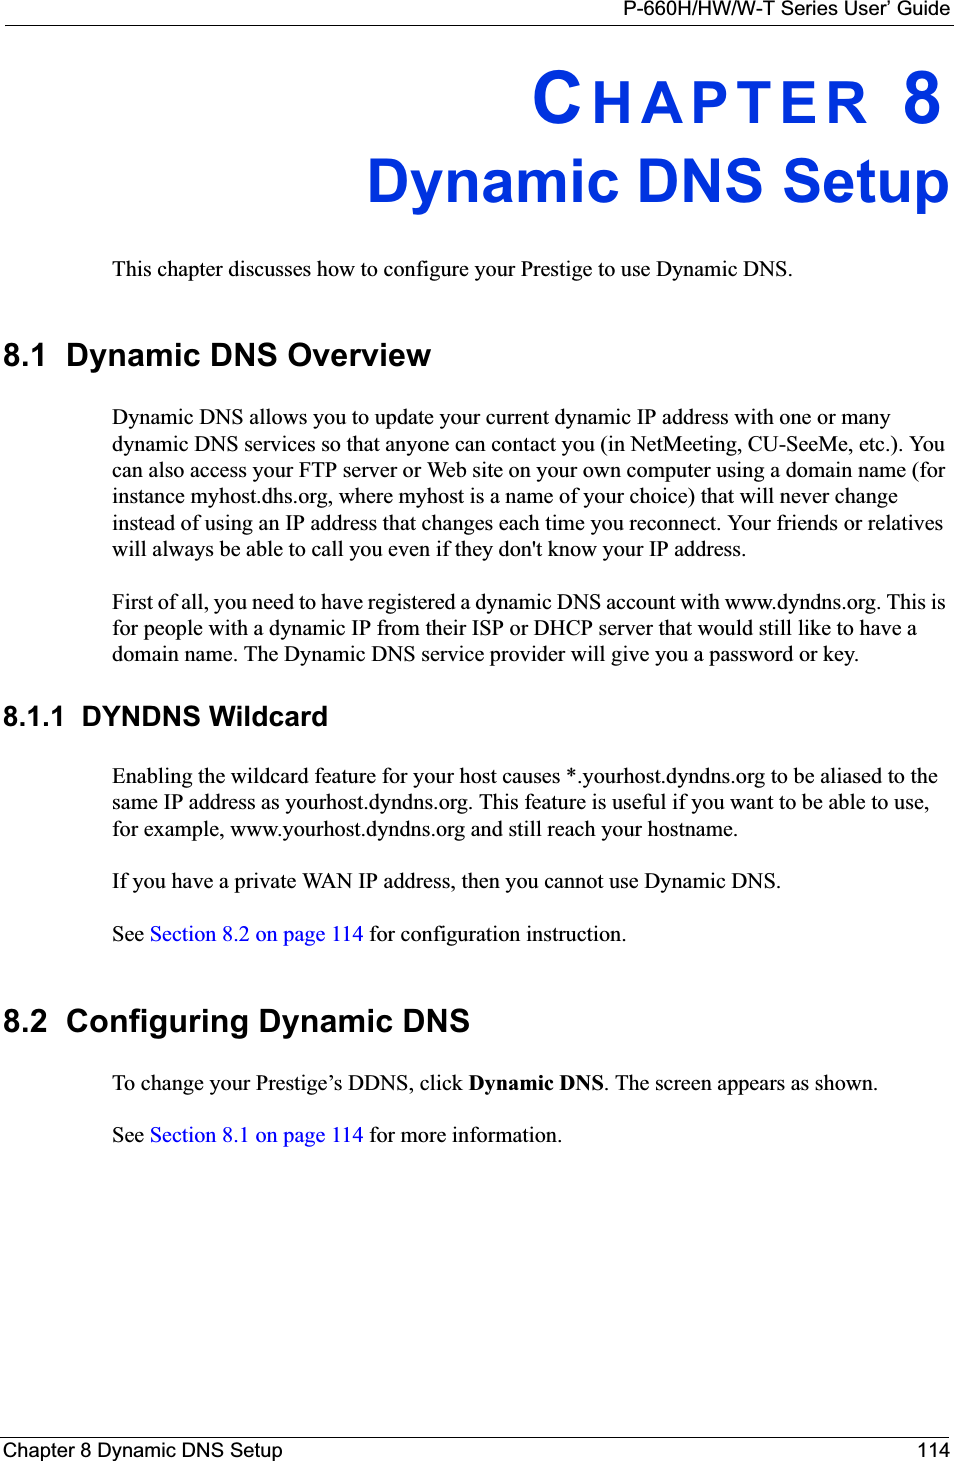 P-660H/HW/W-T Series User’ GuideChapter 8 Dynamic DNS Setup 114CHAPTER 8Dynamic DNS SetupThis chapter discusses how to configure your Prestige to use Dynamic DNS.8.1  Dynamic DNS OverviewDynamic DNS allows you to update your current dynamic IP address with one or many dynamic DNS services so that anyone can contact you (in NetMeeting, CU-SeeMe, etc.). You can also access your FTP server or Web site on your own computer using a domain name (for instance myhost.dhs.org, where myhost is a name of your choice) that will never change instead of using an IP address that changes each time you reconnect. Your friends or relatives will always be able to call you even if they don&apos;t know your IP address.First of all, you need to have registered a dynamic DNS account with www.dyndns.org. This is for people with a dynamic IP from their ISP or DHCP server that would still like to have a domain name. The Dynamic DNS service provider will give you a password or key. 8.1.1  DYNDNS WildcardEnabling the wildcard feature for your host causes *.yourhost.dyndns.org to be aliased to the same IP address as yourhost.dyndns.org. This feature is useful if you want to be able to use, for example, www.yourhost.dyndns.org and still reach your hostname.If you have a private WAN IP address, then you cannot use Dynamic DNS.See Section 8.2 on page 114 for configuration instruction. 8.2  Configuring Dynamic DNS To change your Prestige’s DDNS, click Dynamic DNS. The screen appears as shown.See Section 8.1 on page 114 for more information. 